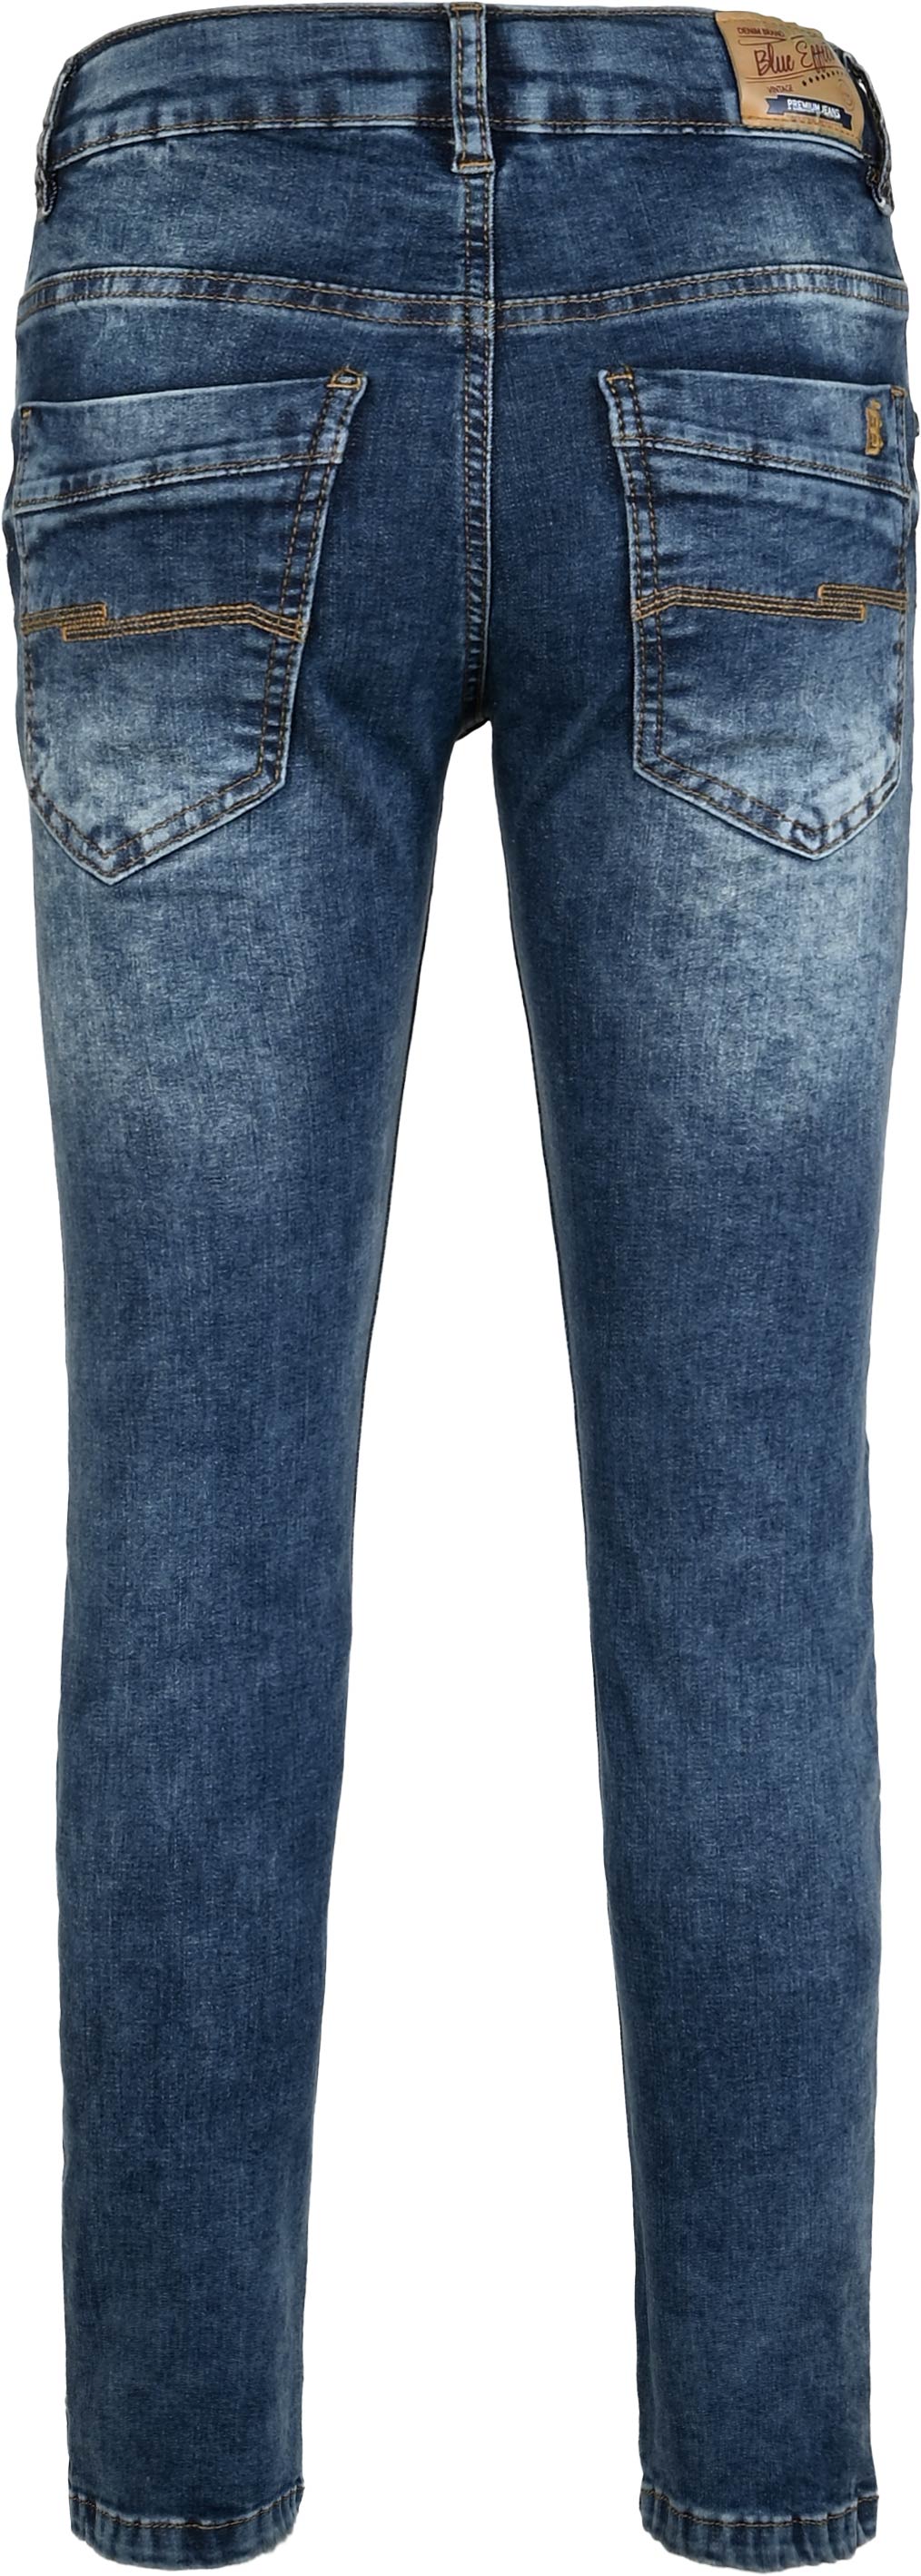 2833-Boys Relaxed Fit Jeans available in Slim,Normal,Wide